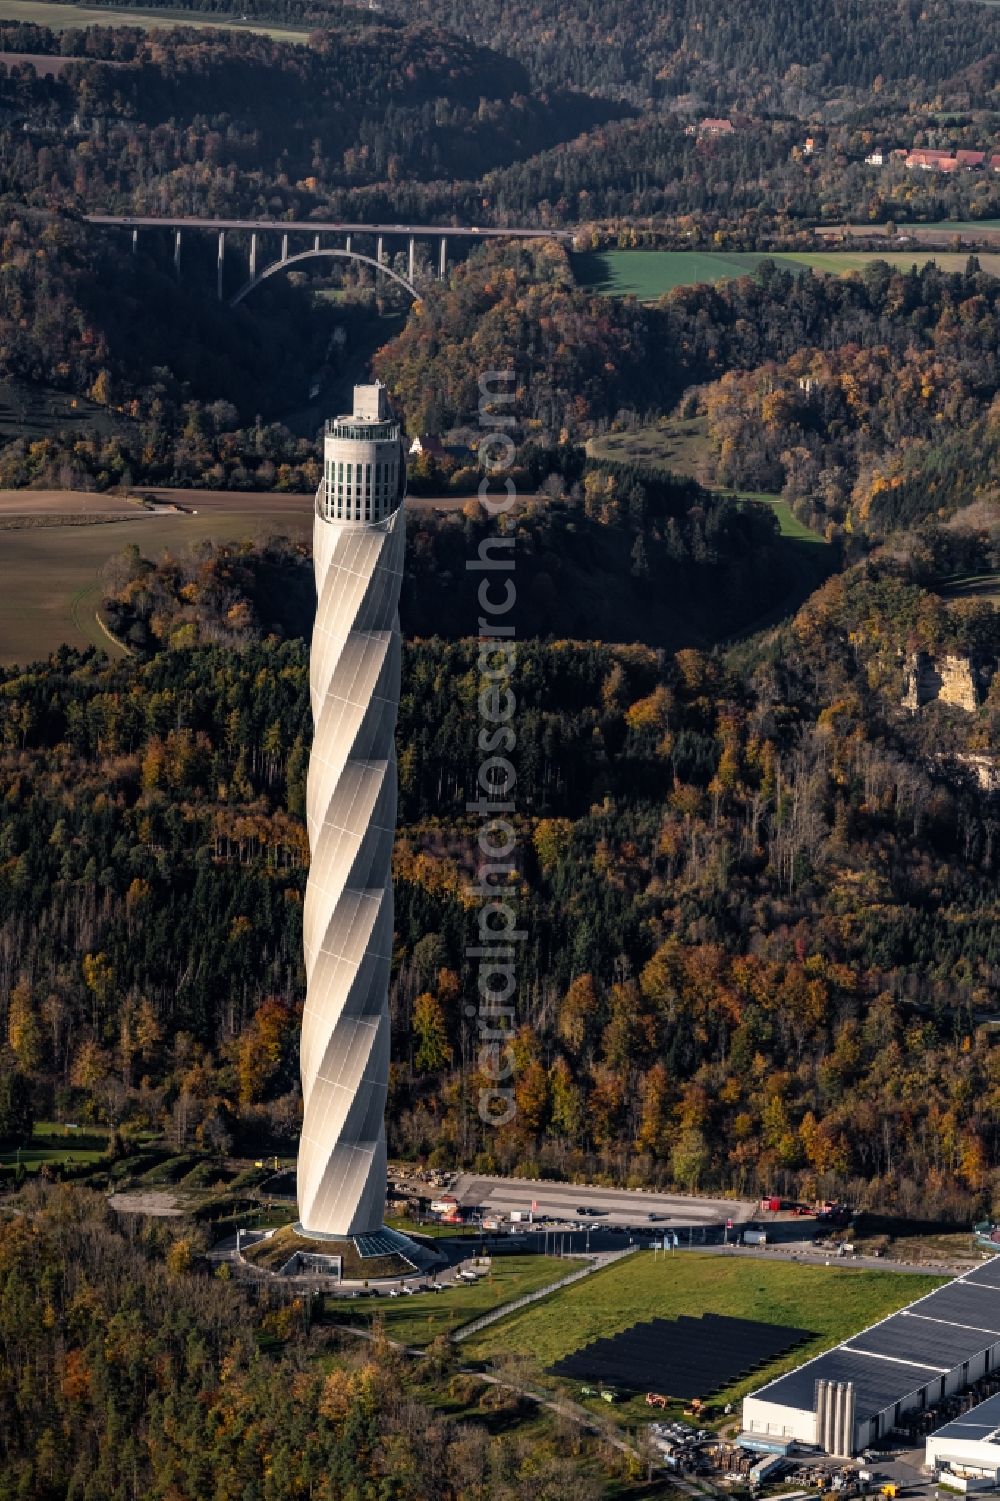 Aerial image Rottweil - Site of the ThyssenKrupp testing tower for Speed elevators in Rottweil in Baden - Wuerttemberg